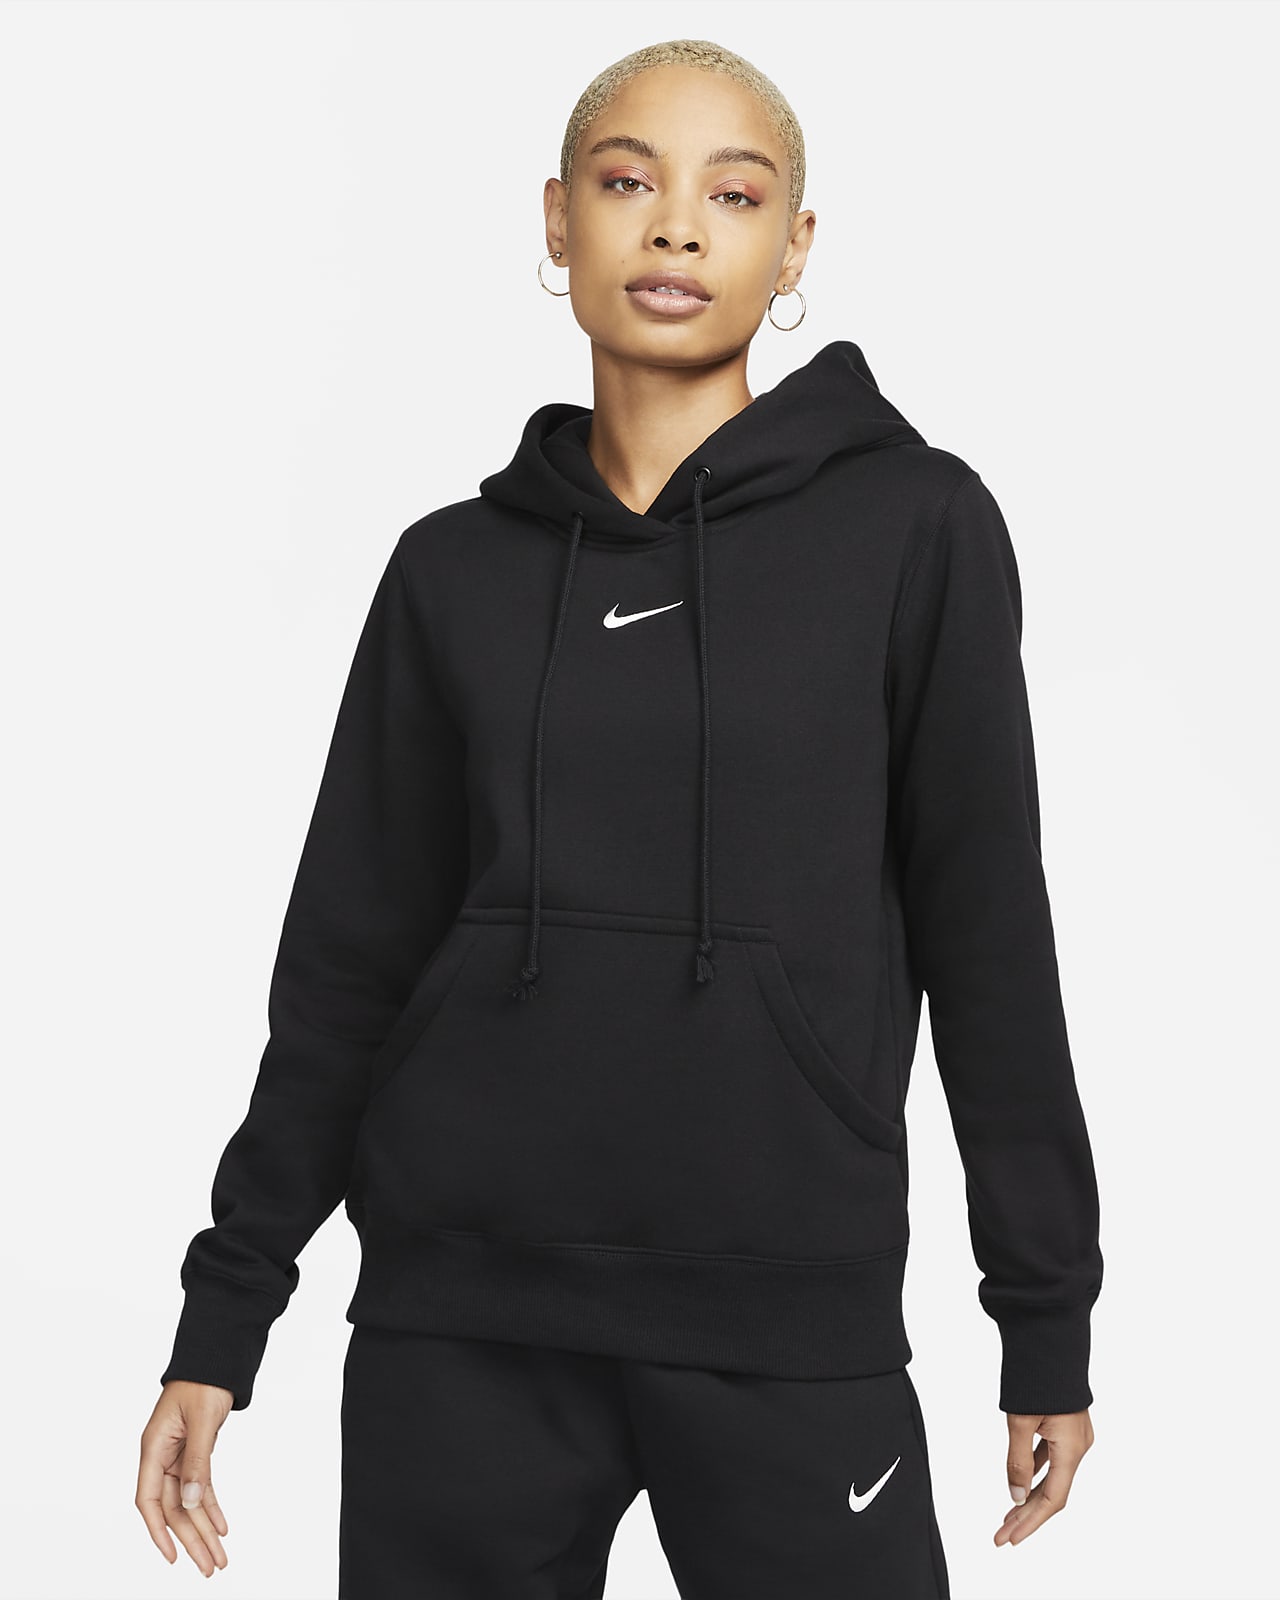 https://static.nike.com/a/images/t_PDP_1280_v1/f_auto,q_auto:eco/2bcbed15-8351-4b1a-bb0d-33144a77cc6c/sportswear-phoenix-fleece-pullover-hoodie-X9XVZM.png